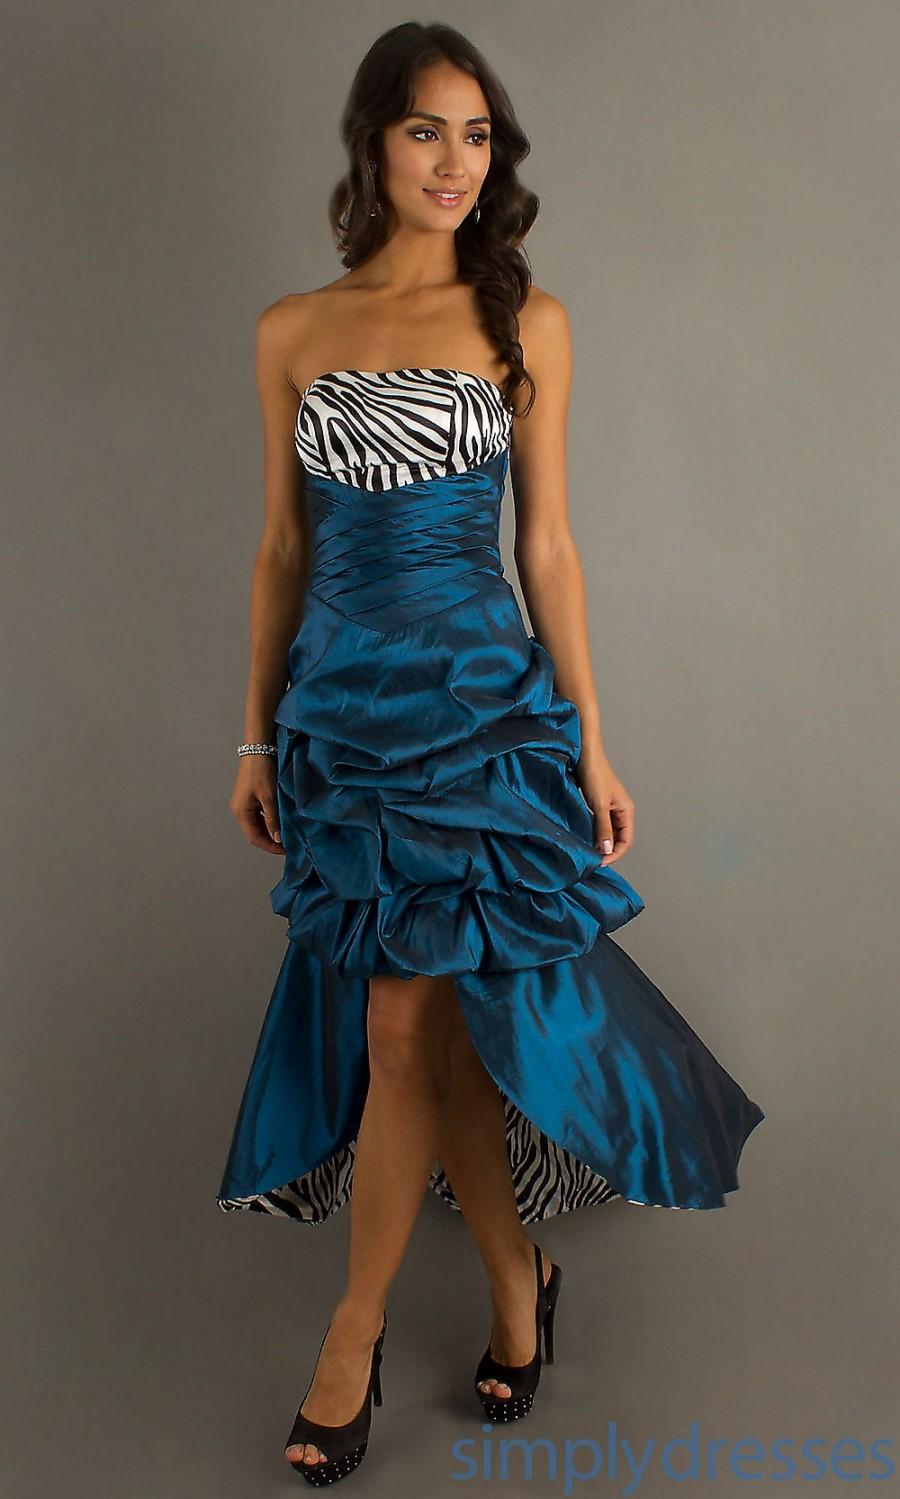 Hochzeit - New Ruched Strapless Taffeta A-line Royal Blue Bubble Prom/cocktail/homecoming Dress - Cheap Discount Evening Gowns